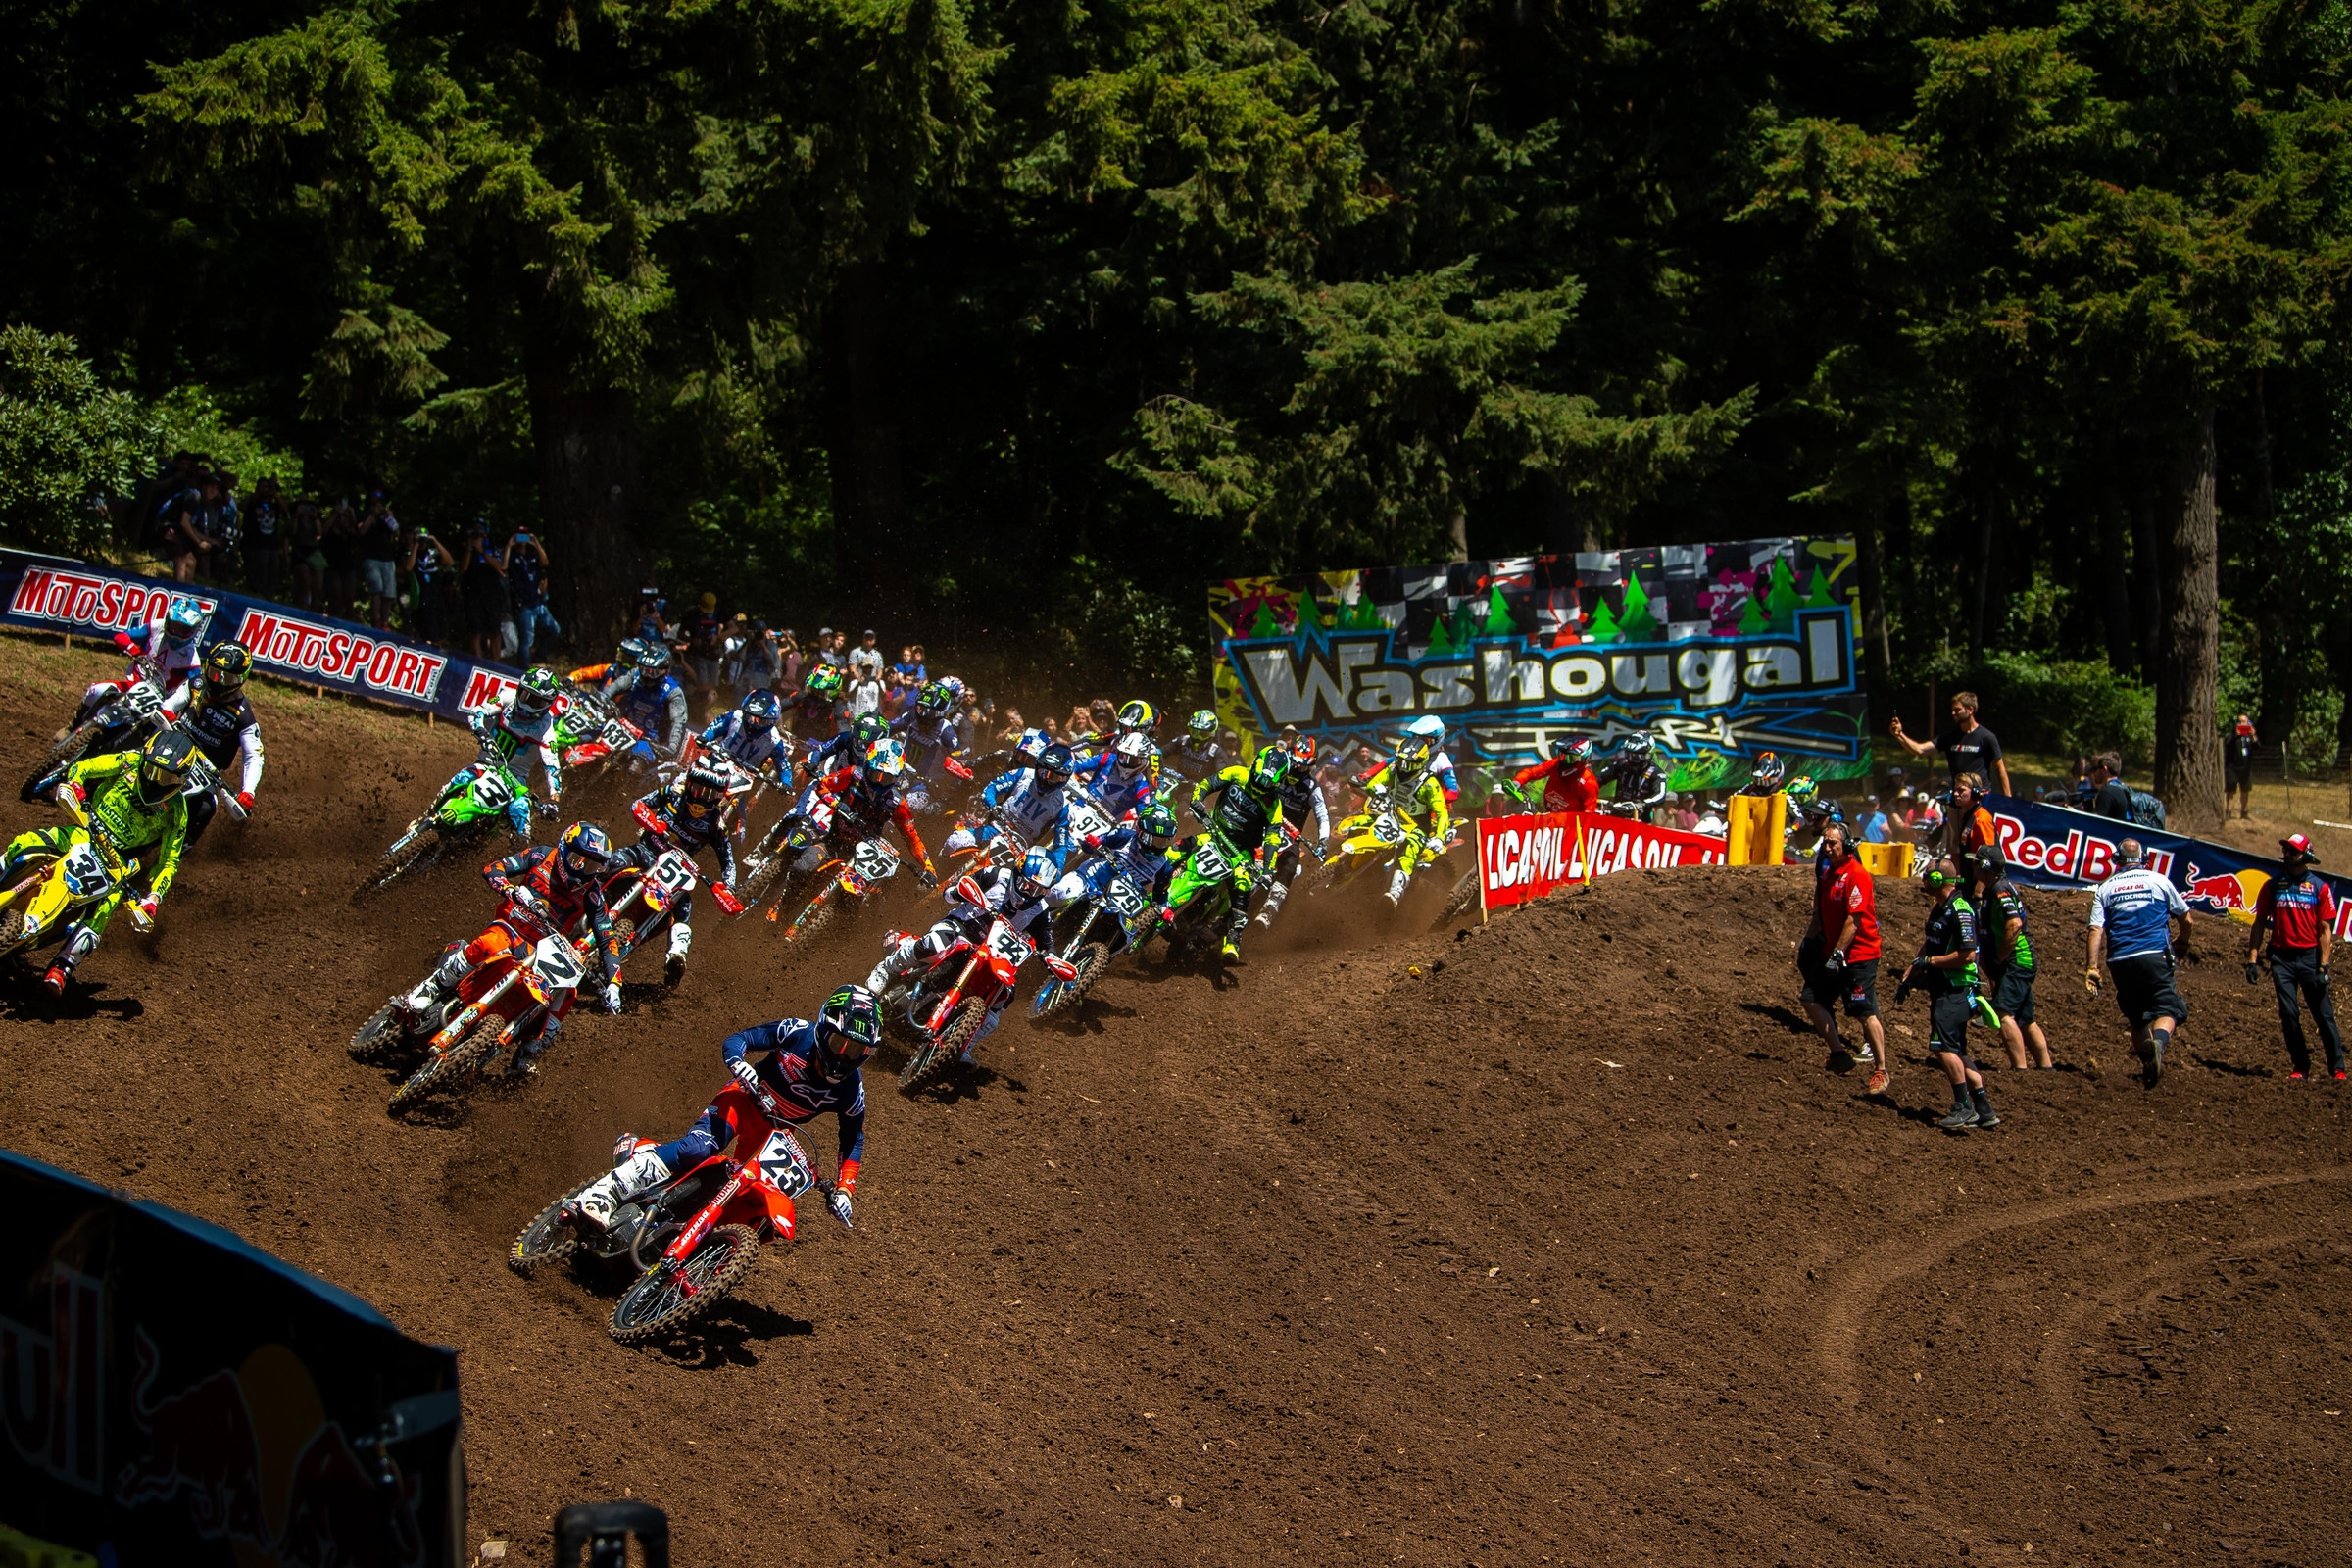 Listen 2021 Washougal National Race Review Podcast